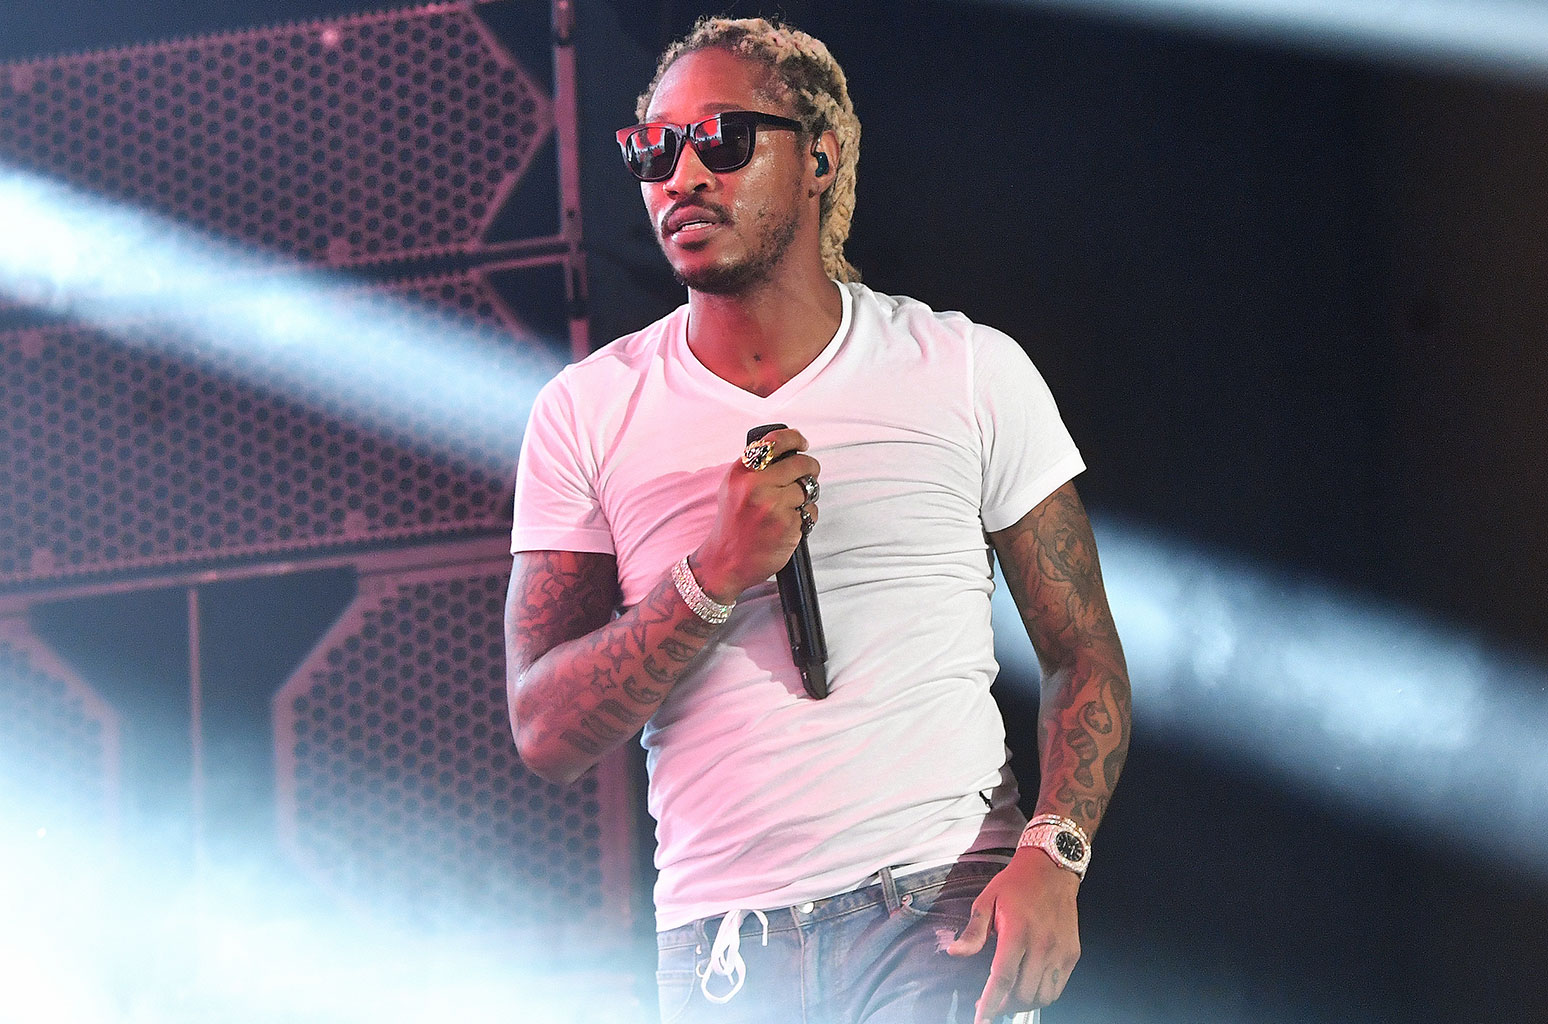 Watch a Fan Get Tackled by Future's Security After Crashing the Stage - www.billboard.com - Indiana - Nigeria - city Lagos